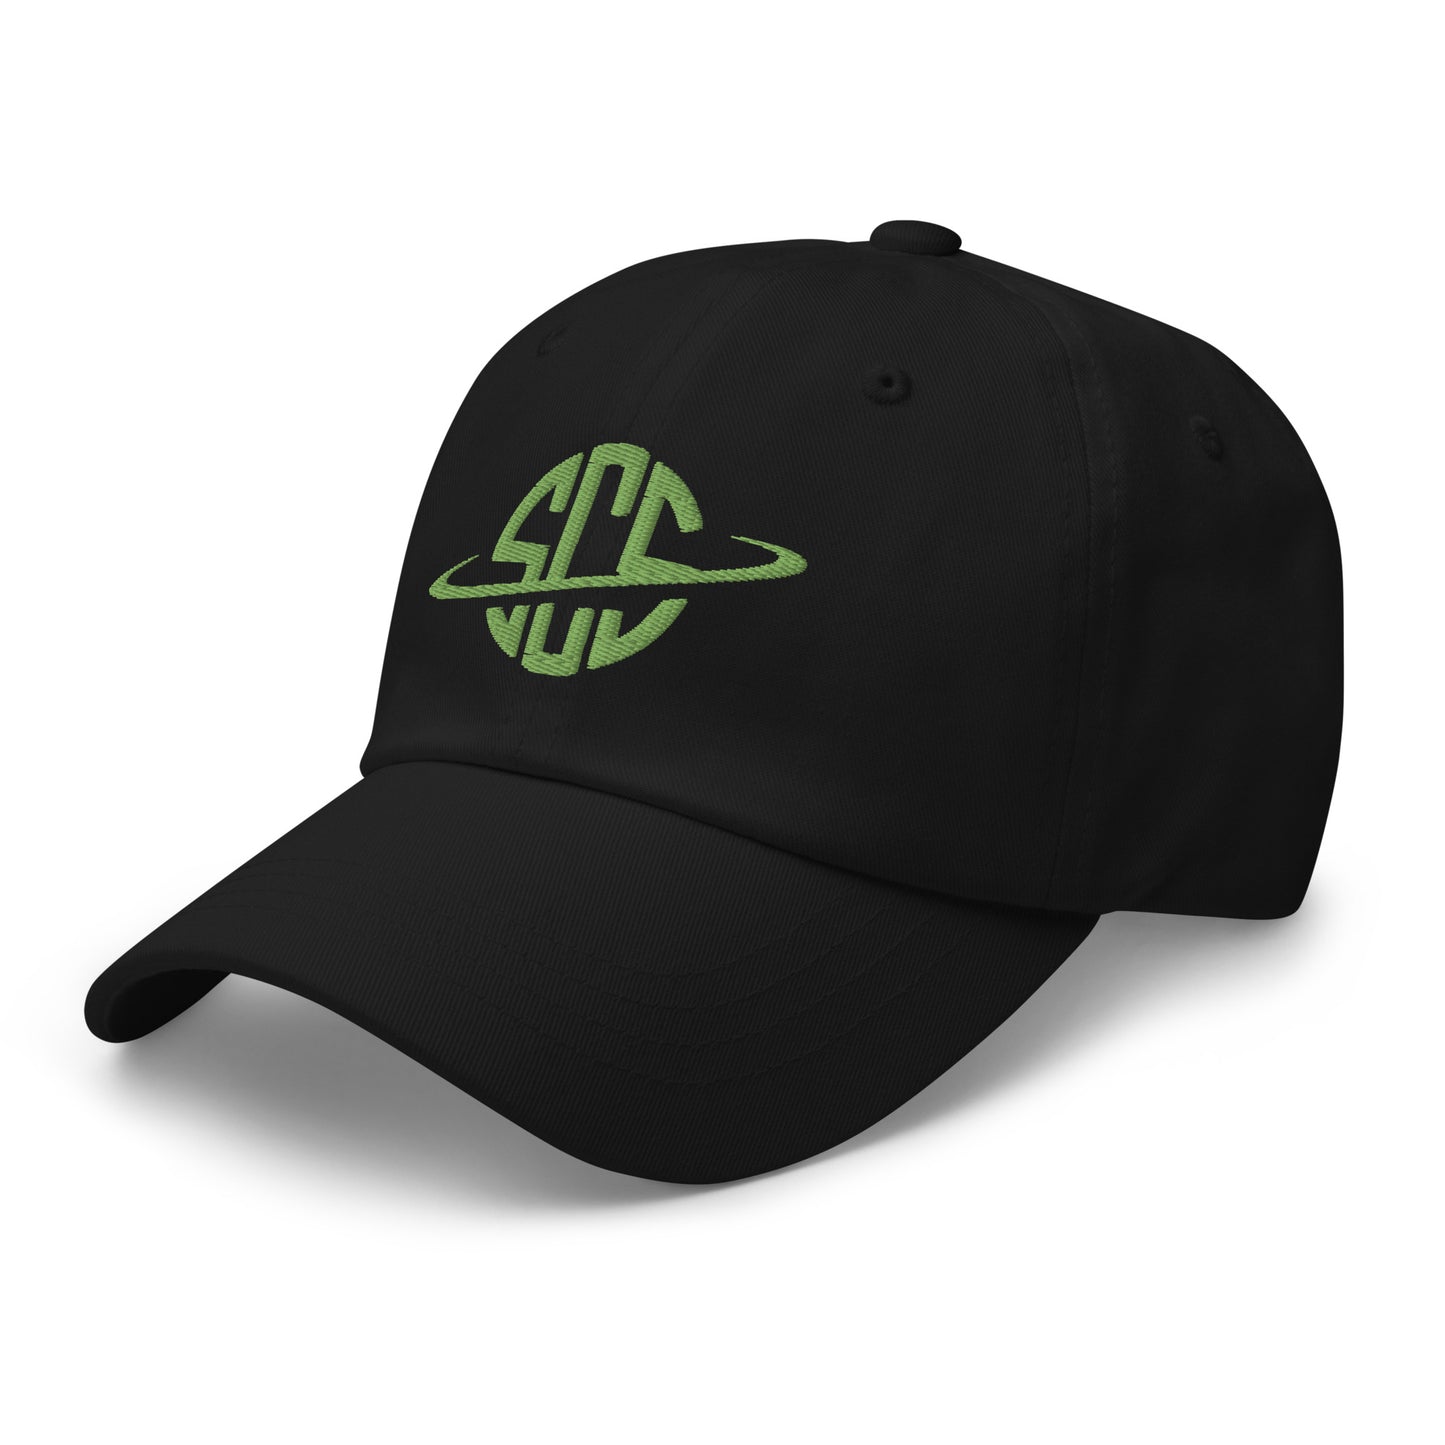 SCS - Embroidered Dad hat